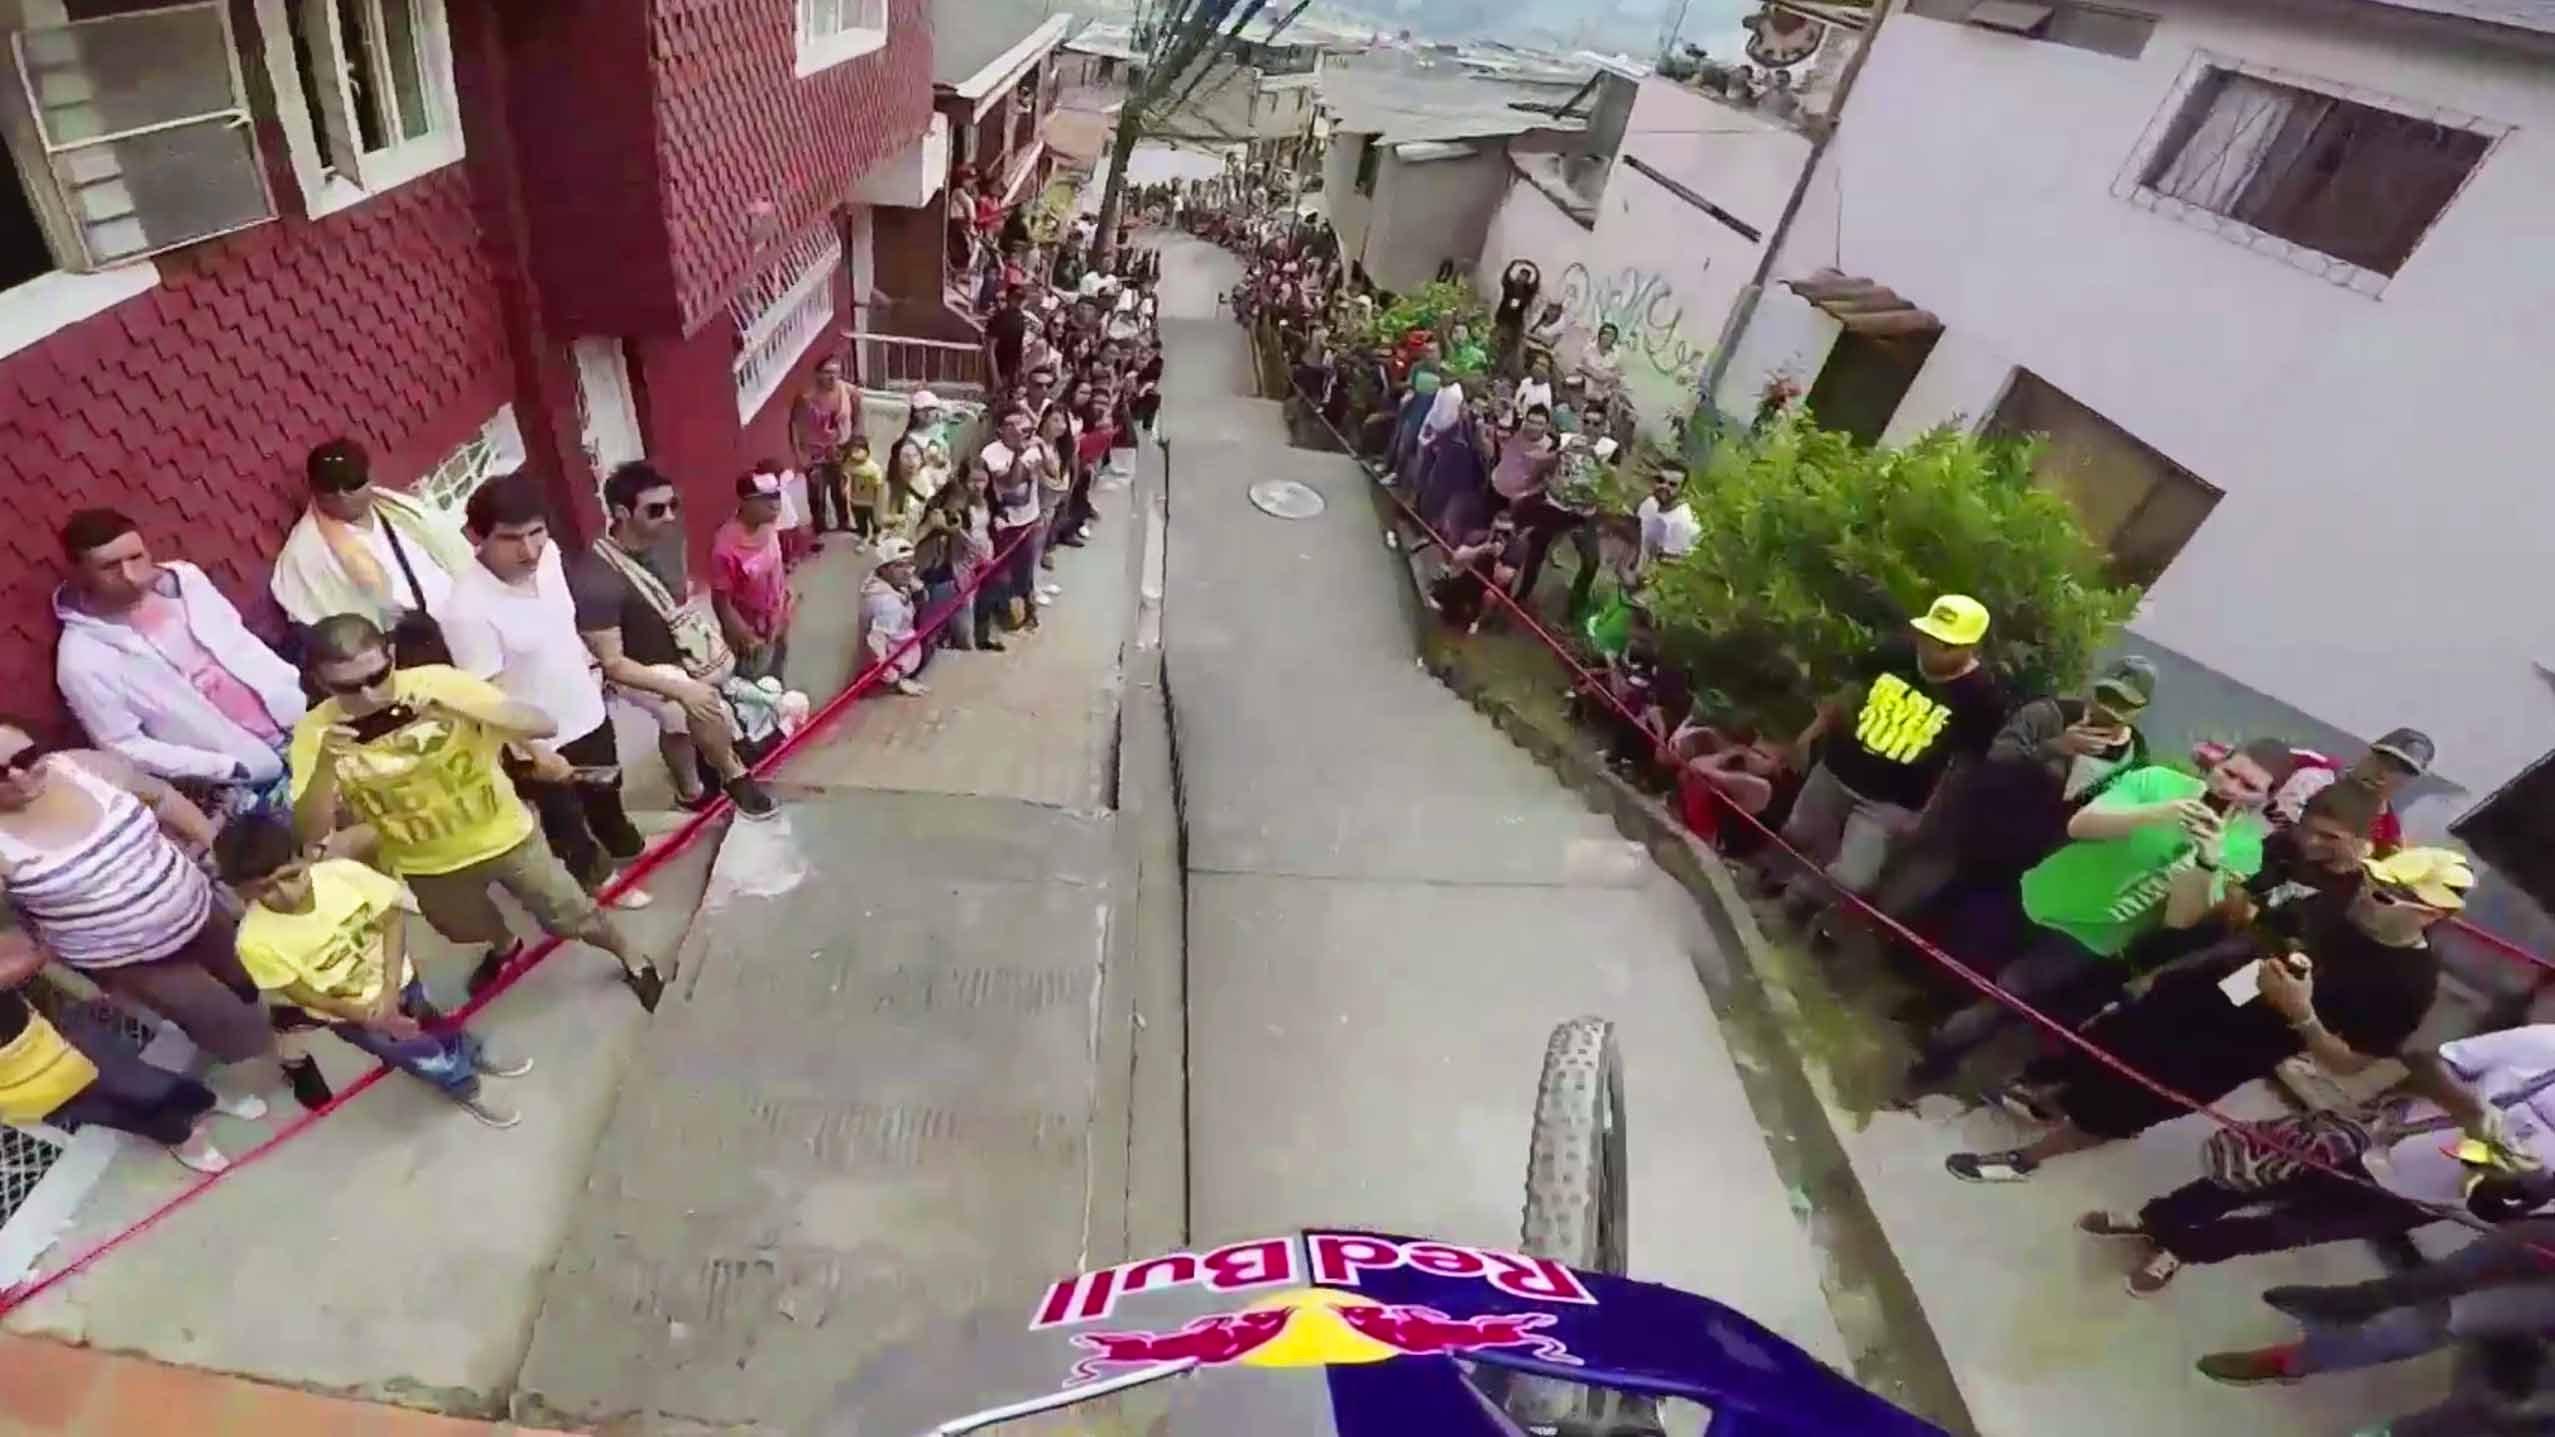 INTENSE URBAN DOWNHILL MOUNTAIN BIKE CONTEST IN COLOMBIA!!! See This SCARY LOOKING POV VIDEO!!!